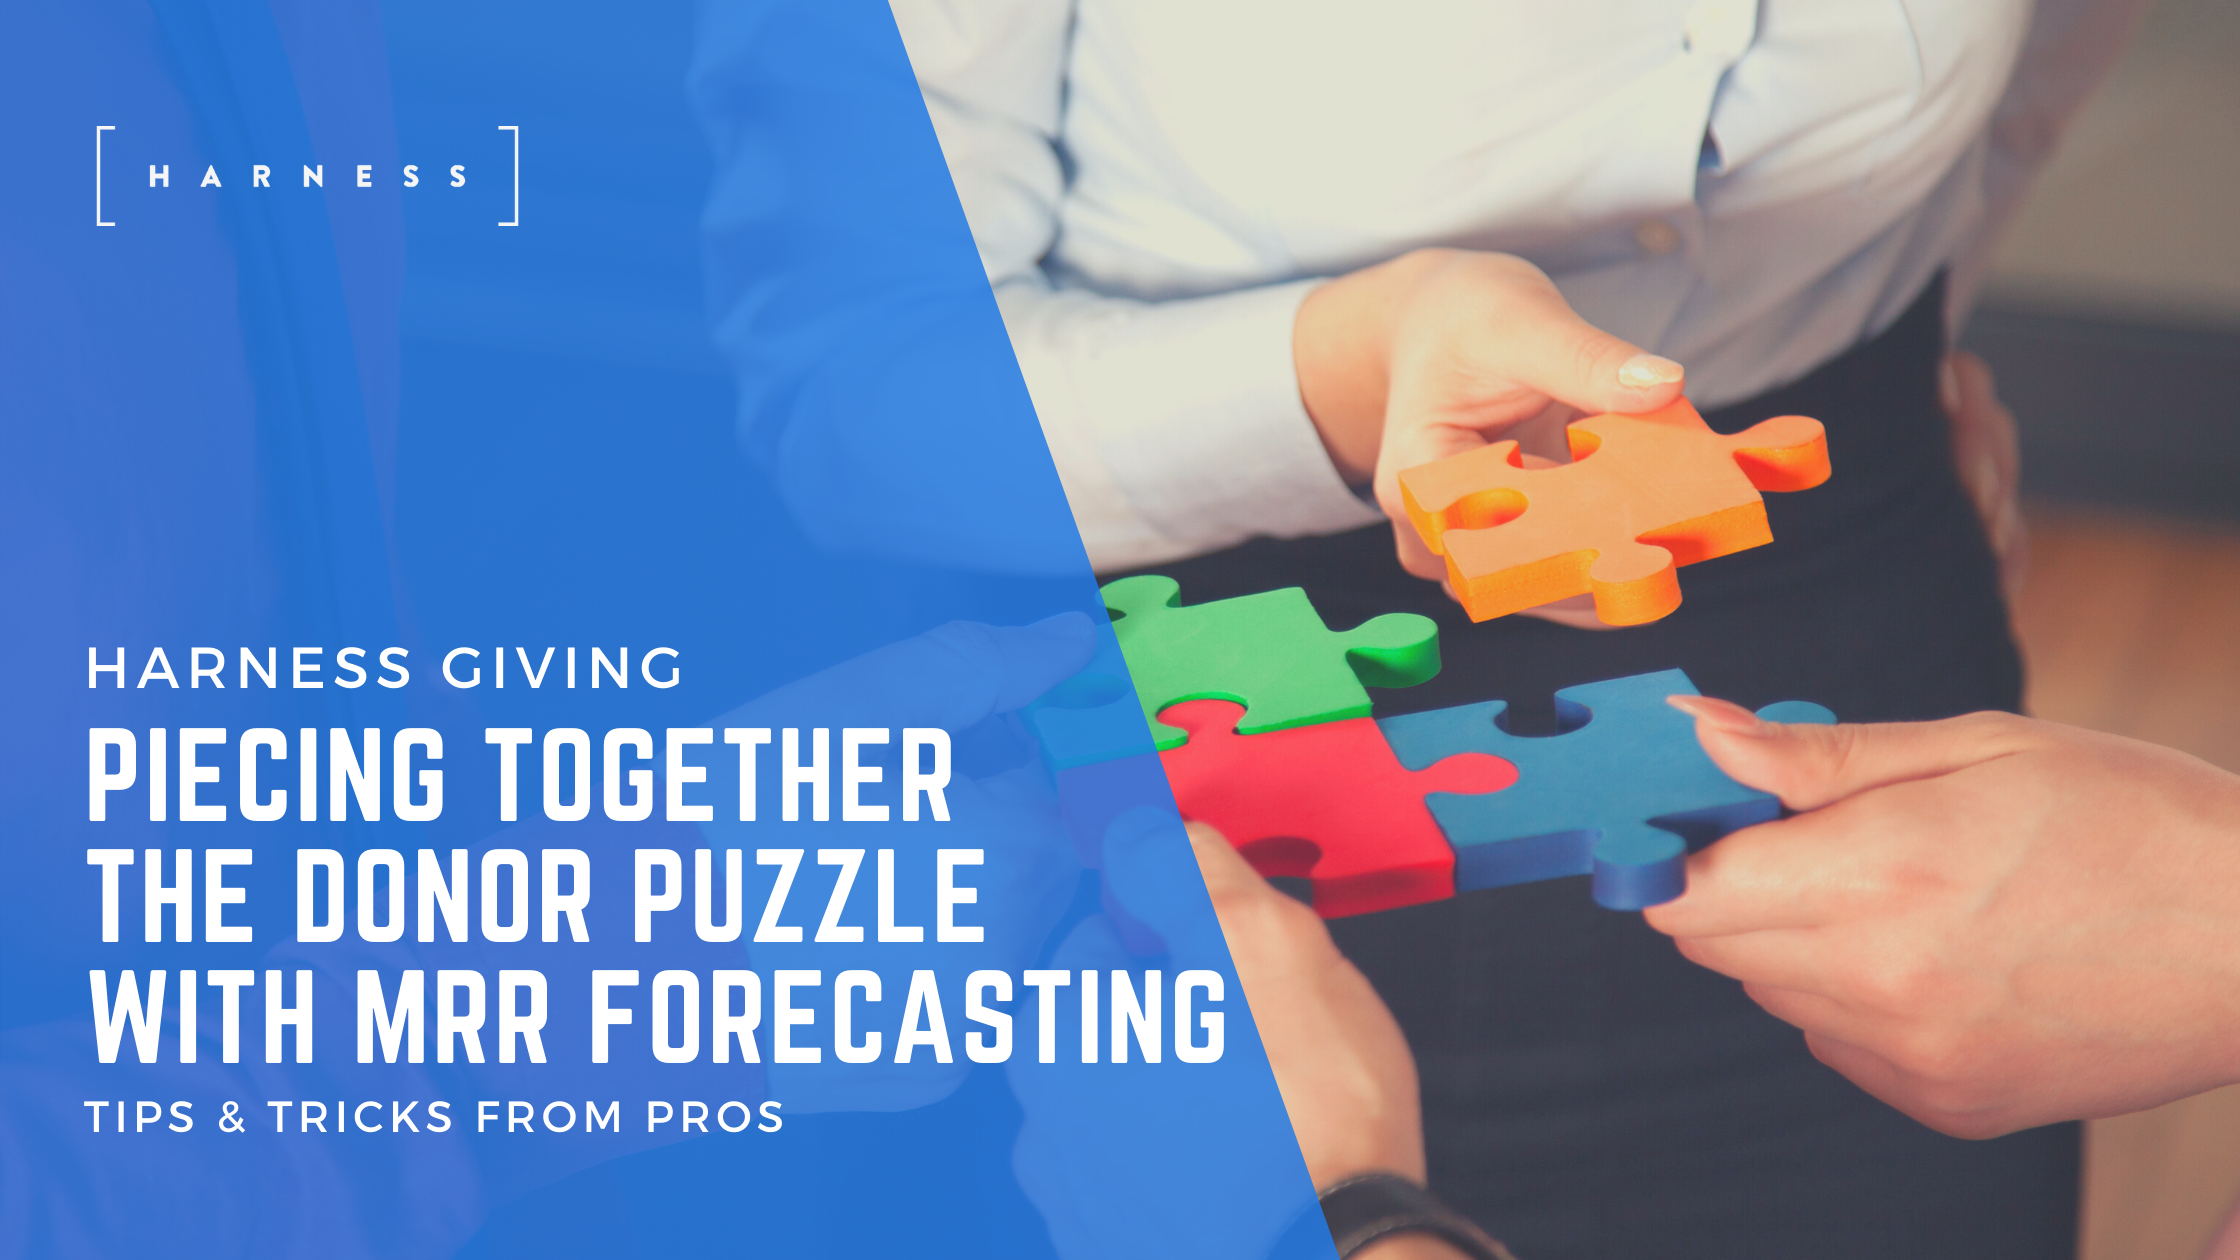 Piecing together the Donor Puzzle with MRR Forecasting